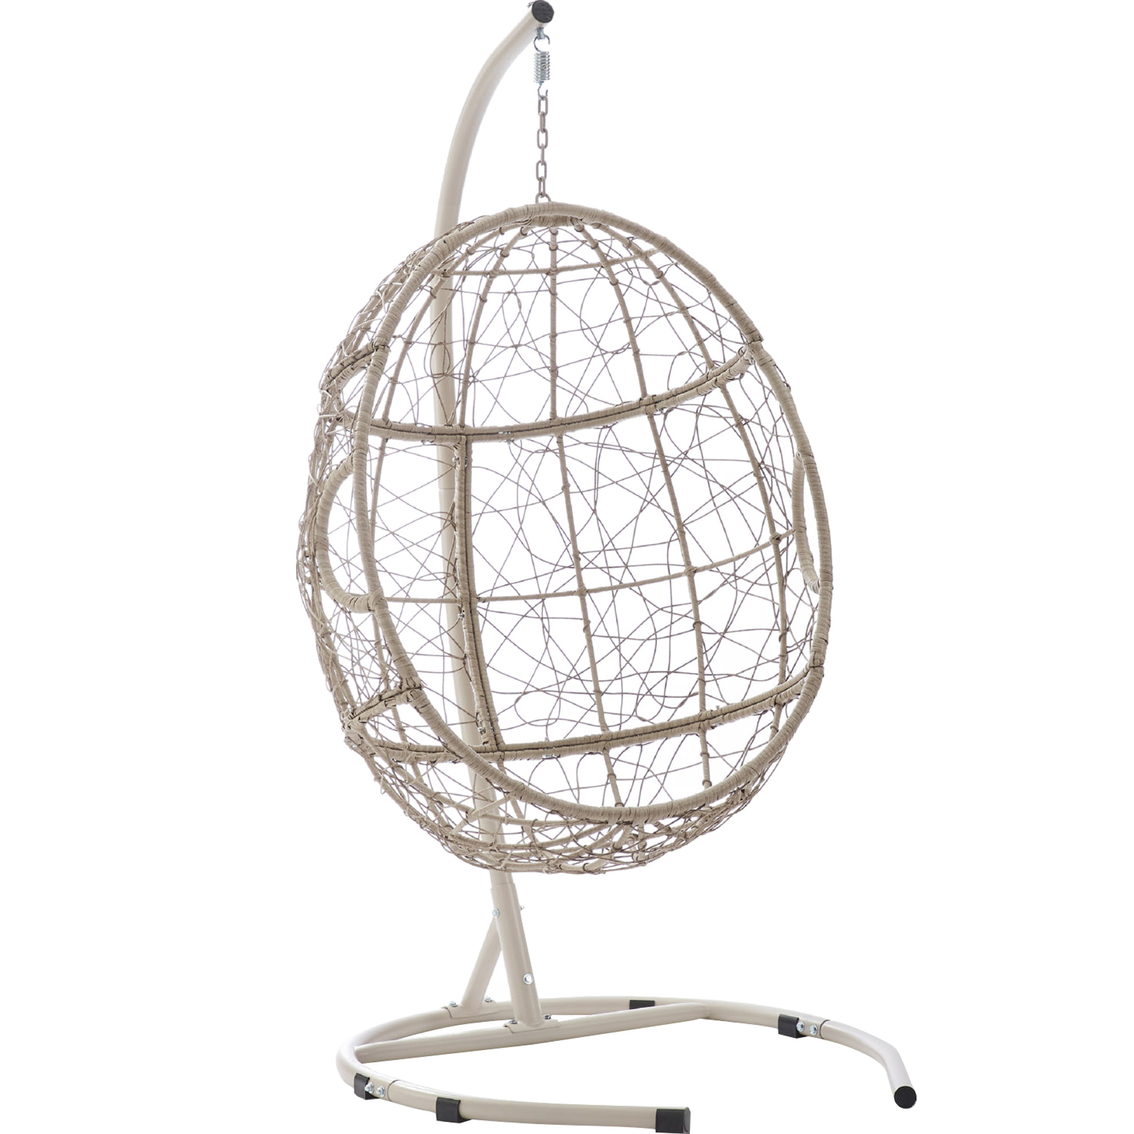 Crosley Cleo Wicker Hanging Egg Chair with Stand - Image 2 of 2